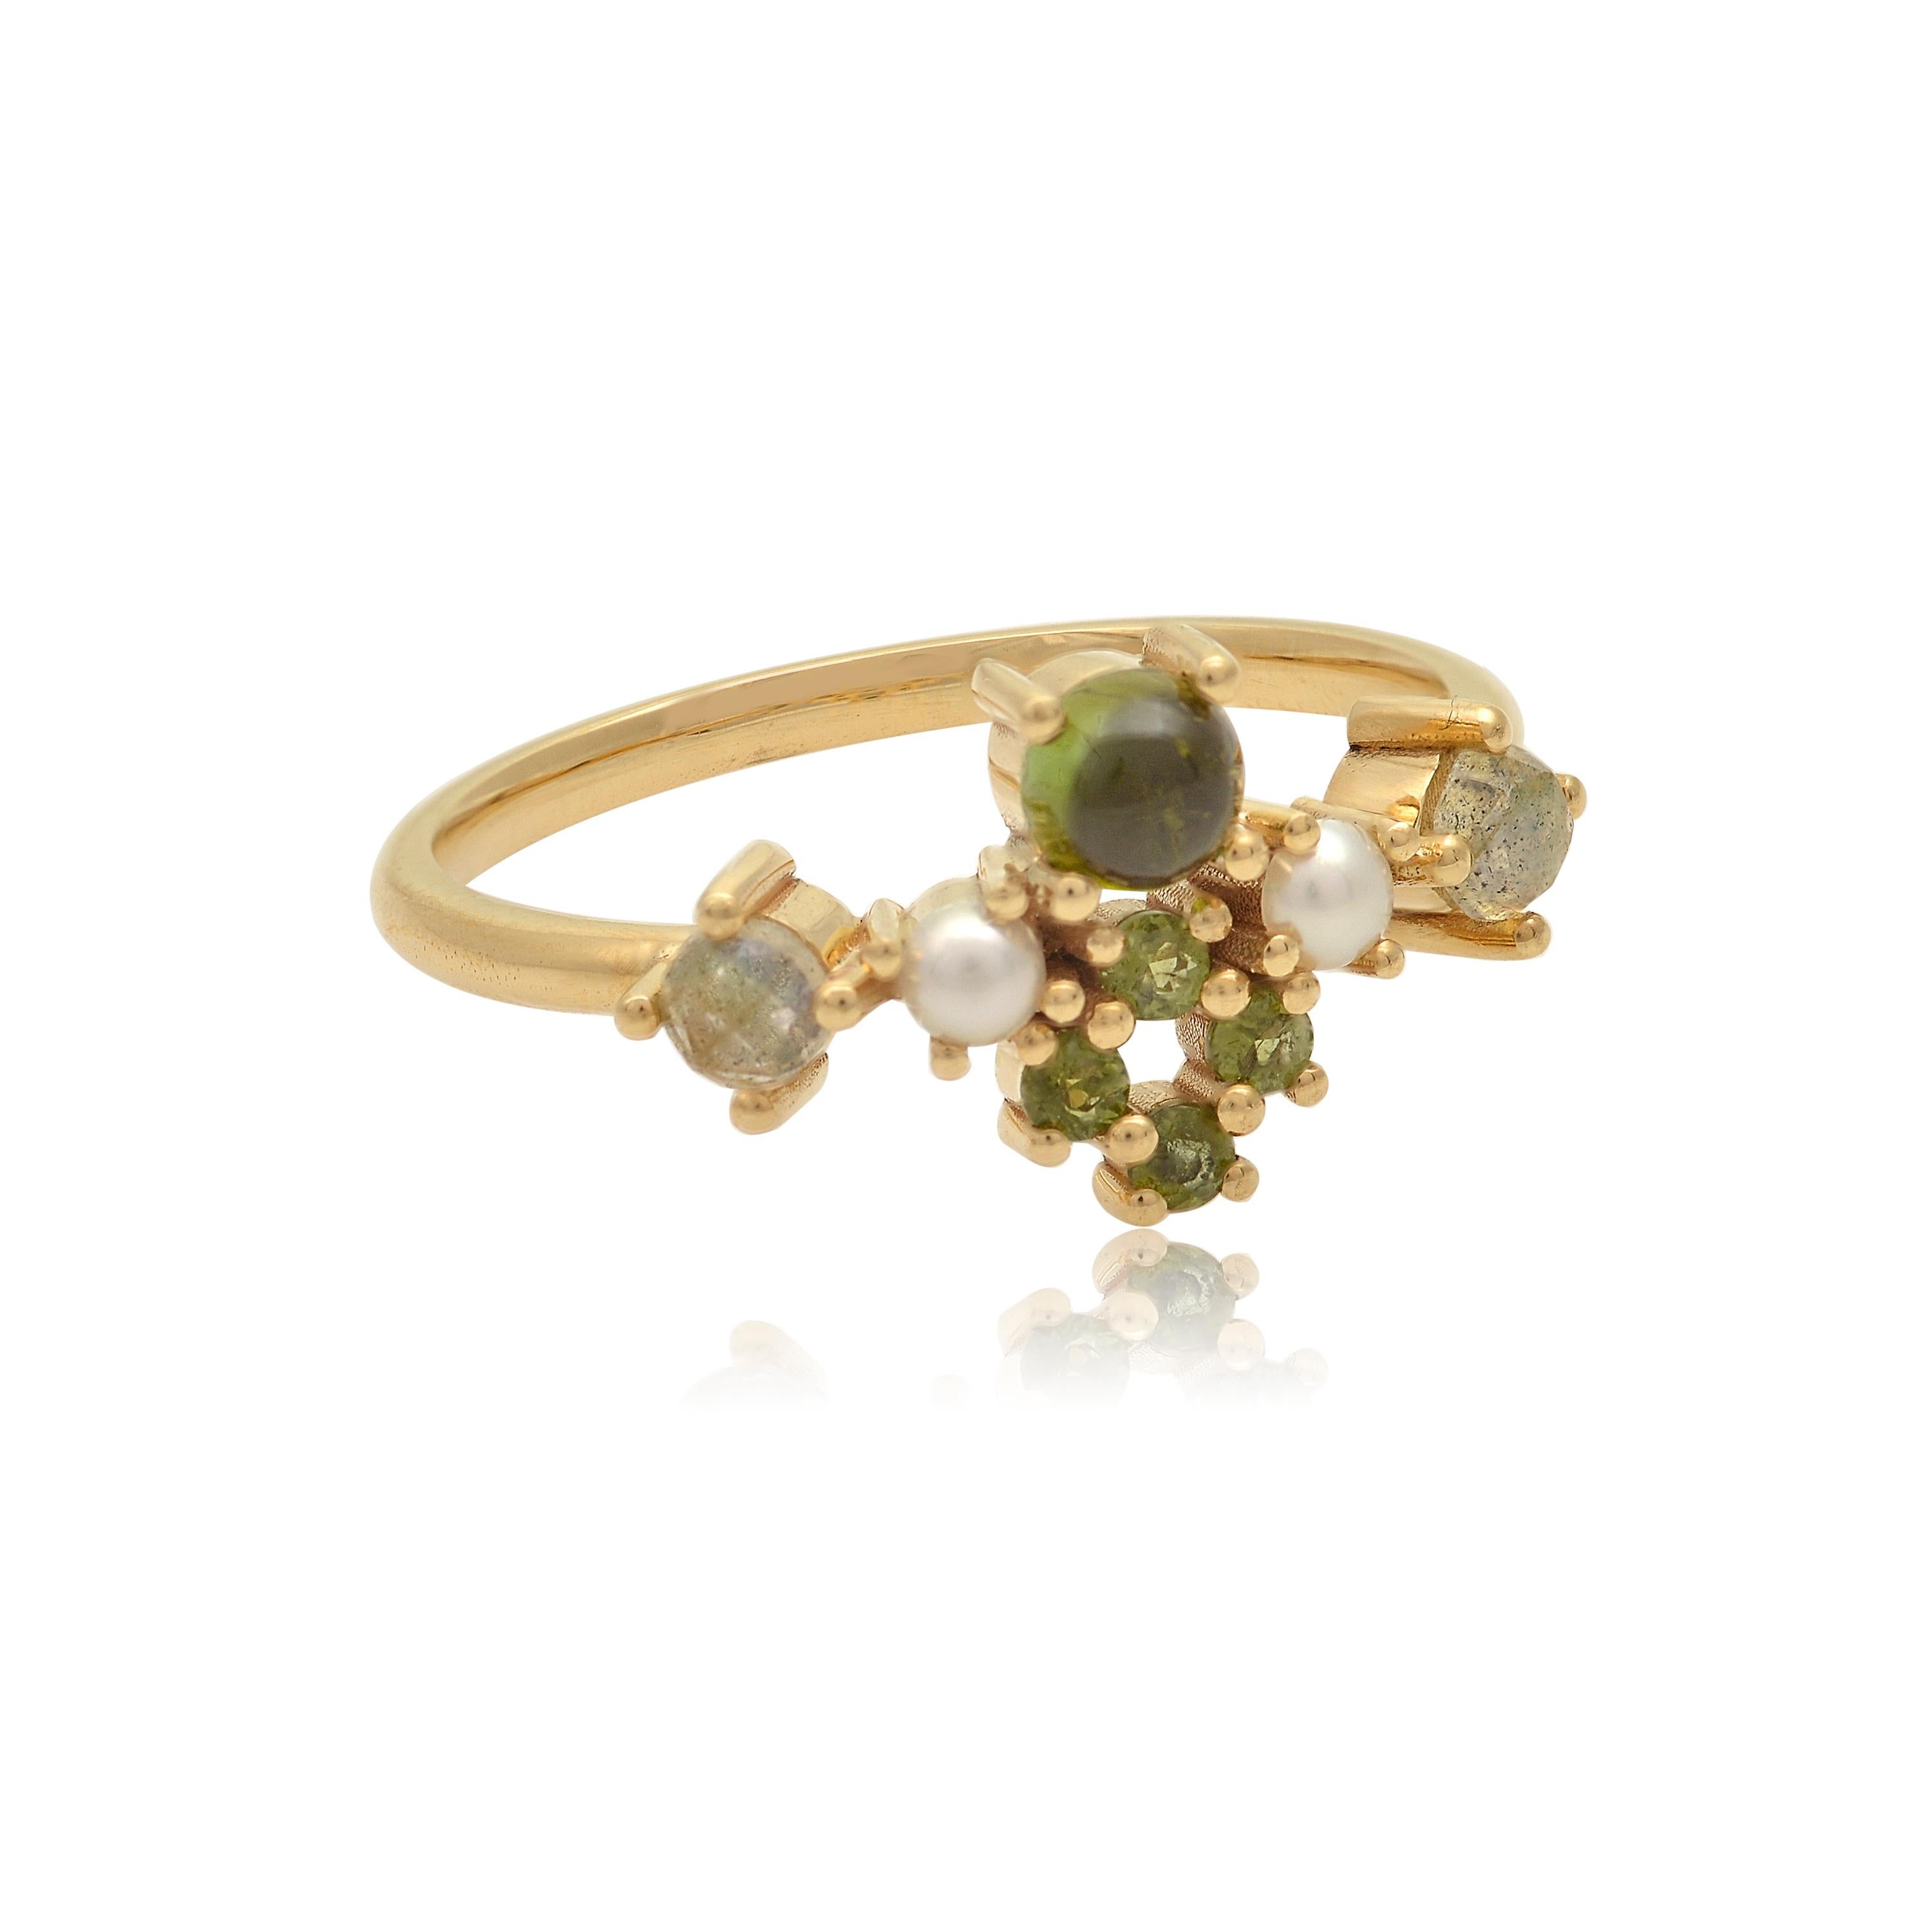 Contemporary Colourful 18 Karat Gold Ring with Tourmalines, Labradorites and Cultured Pearls